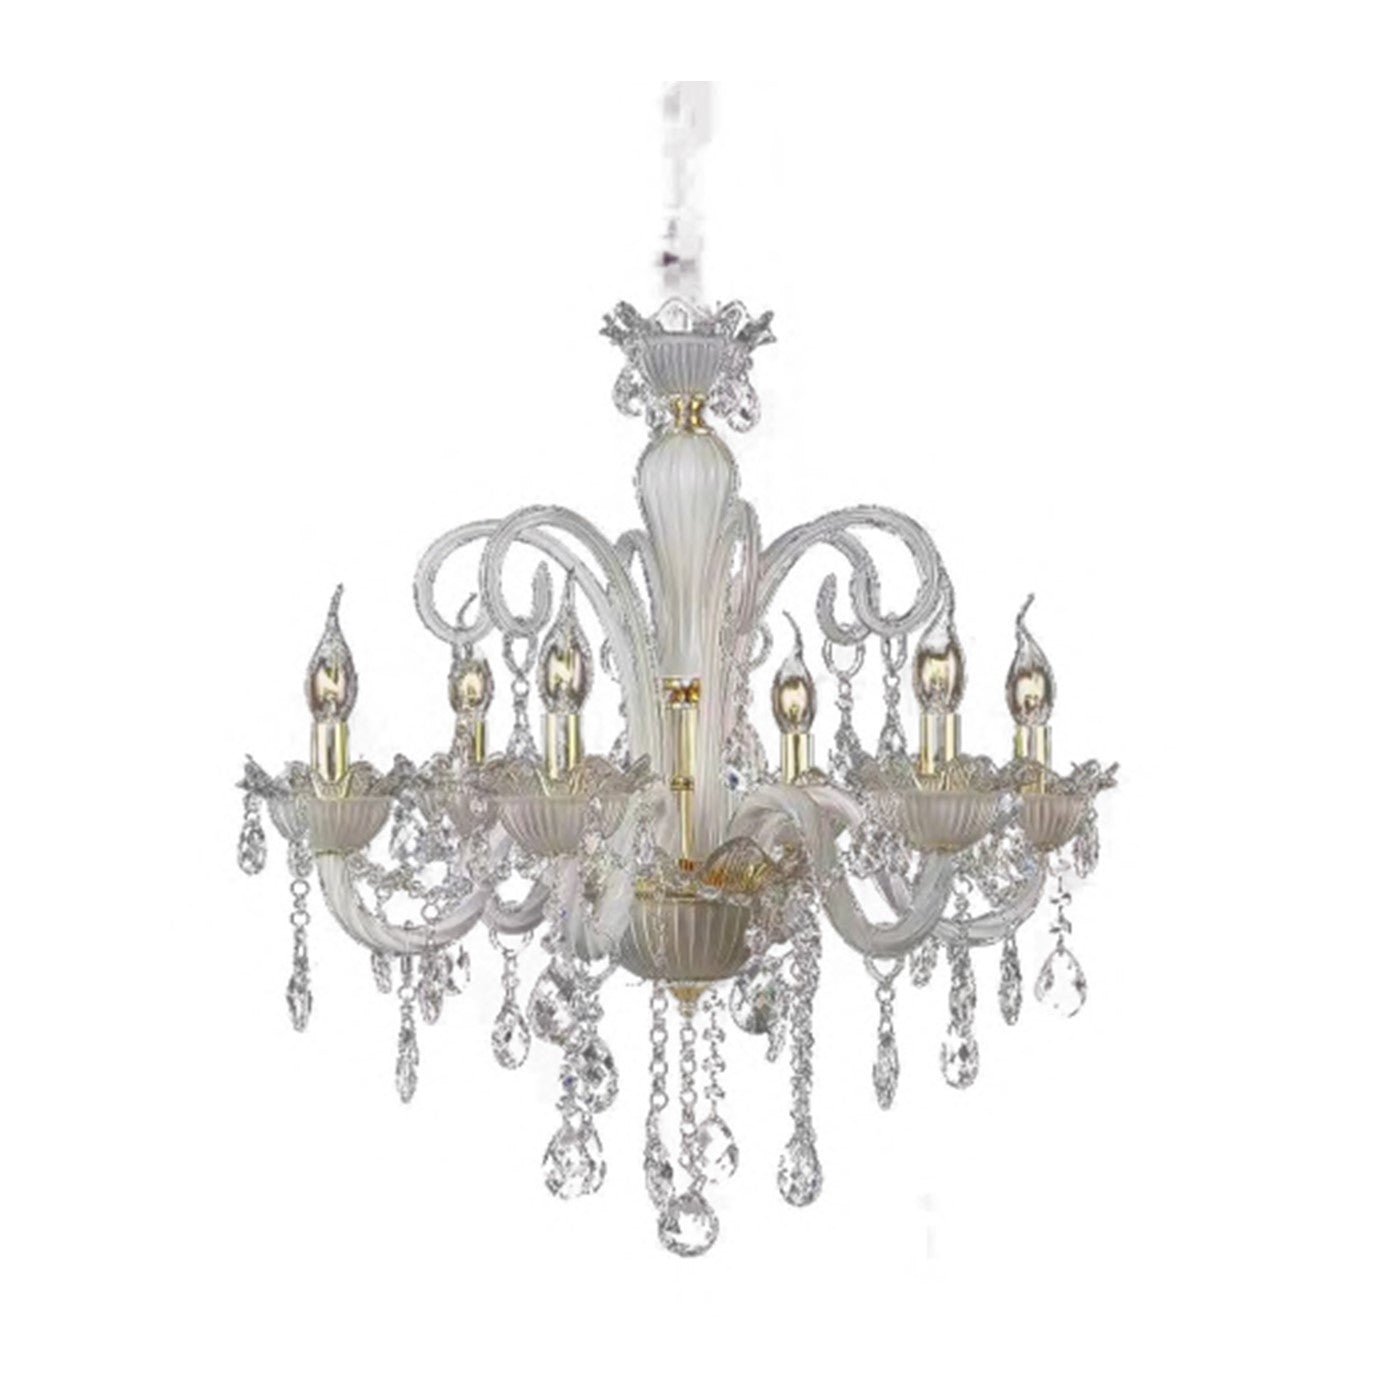 885/8 Candle Arm Chandelier